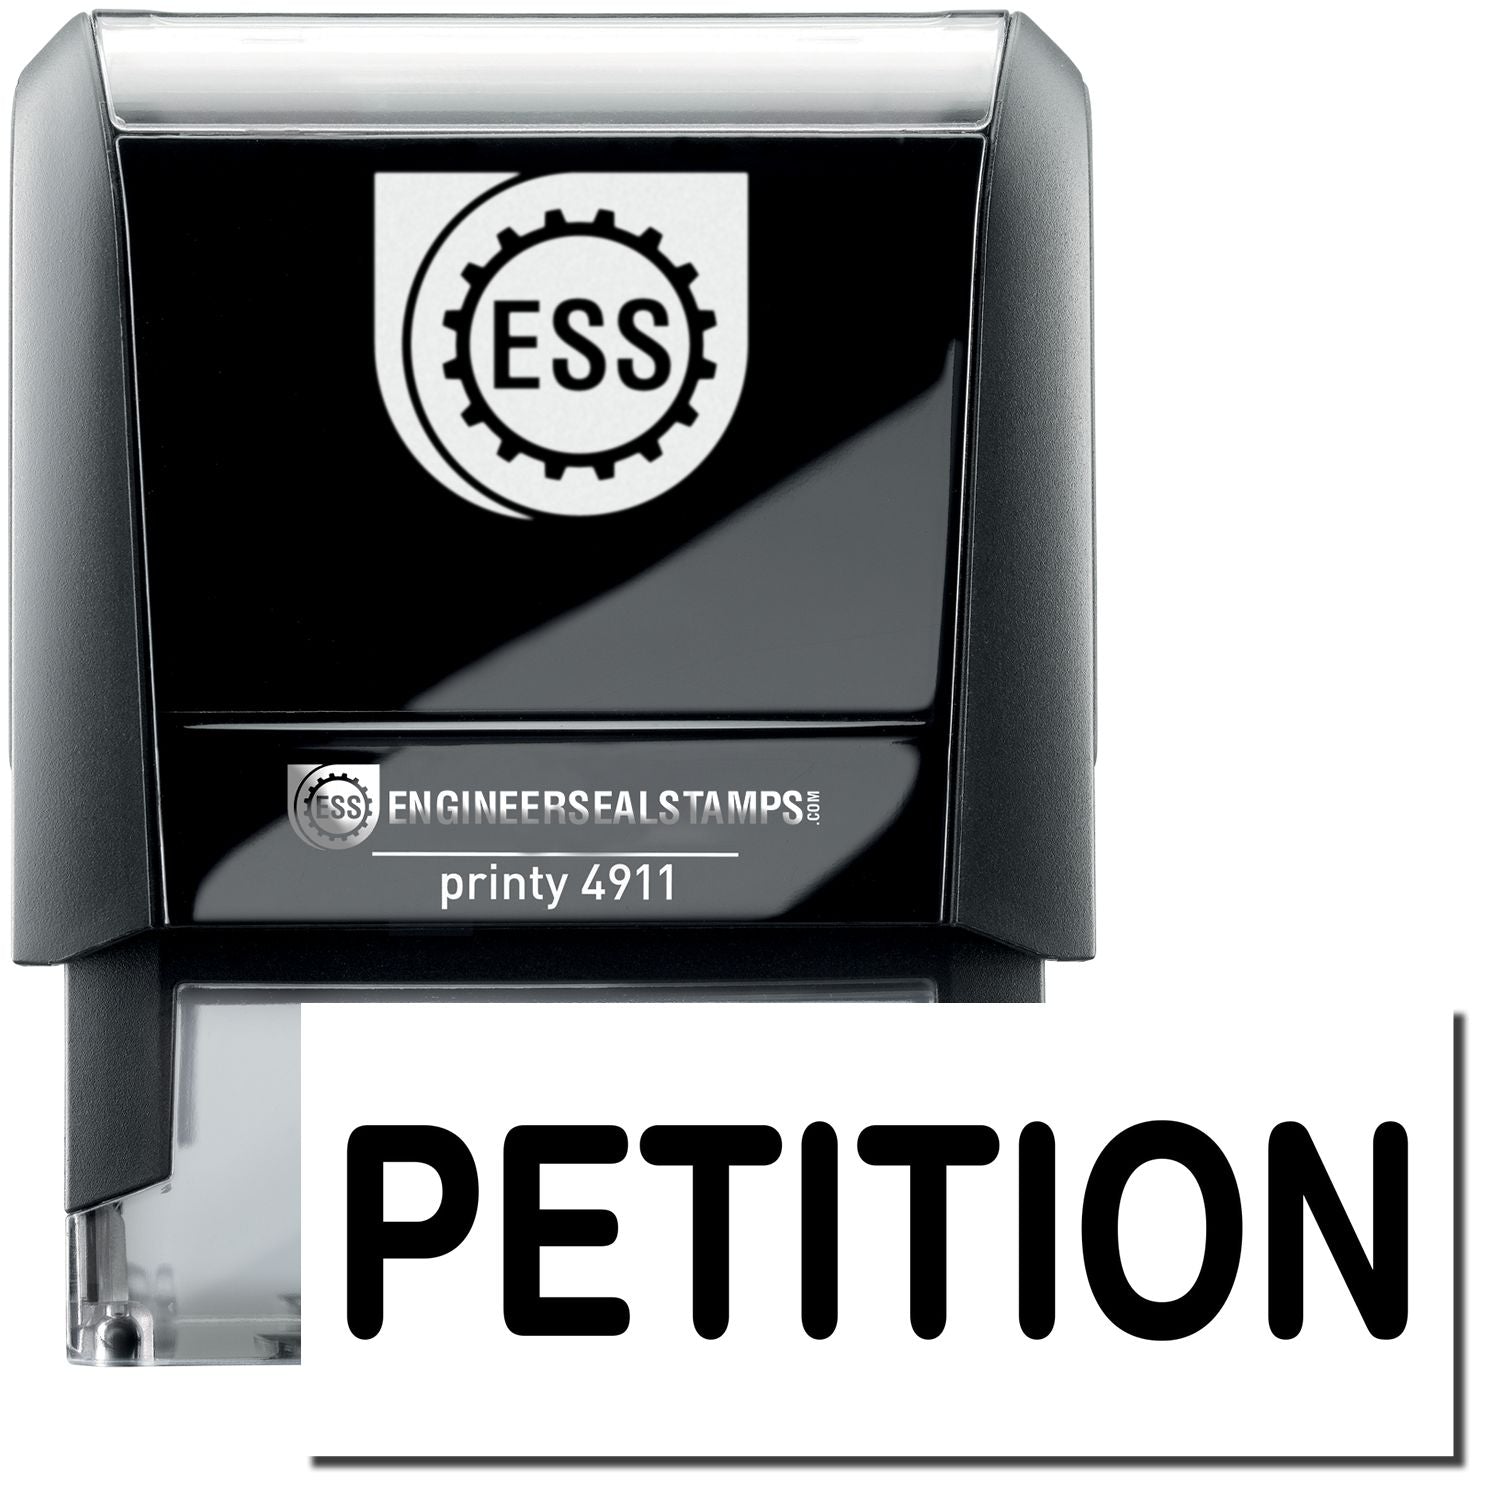 A self-inking stamp with a stamped image showing how the text "PETITION" is displayed after stamping.